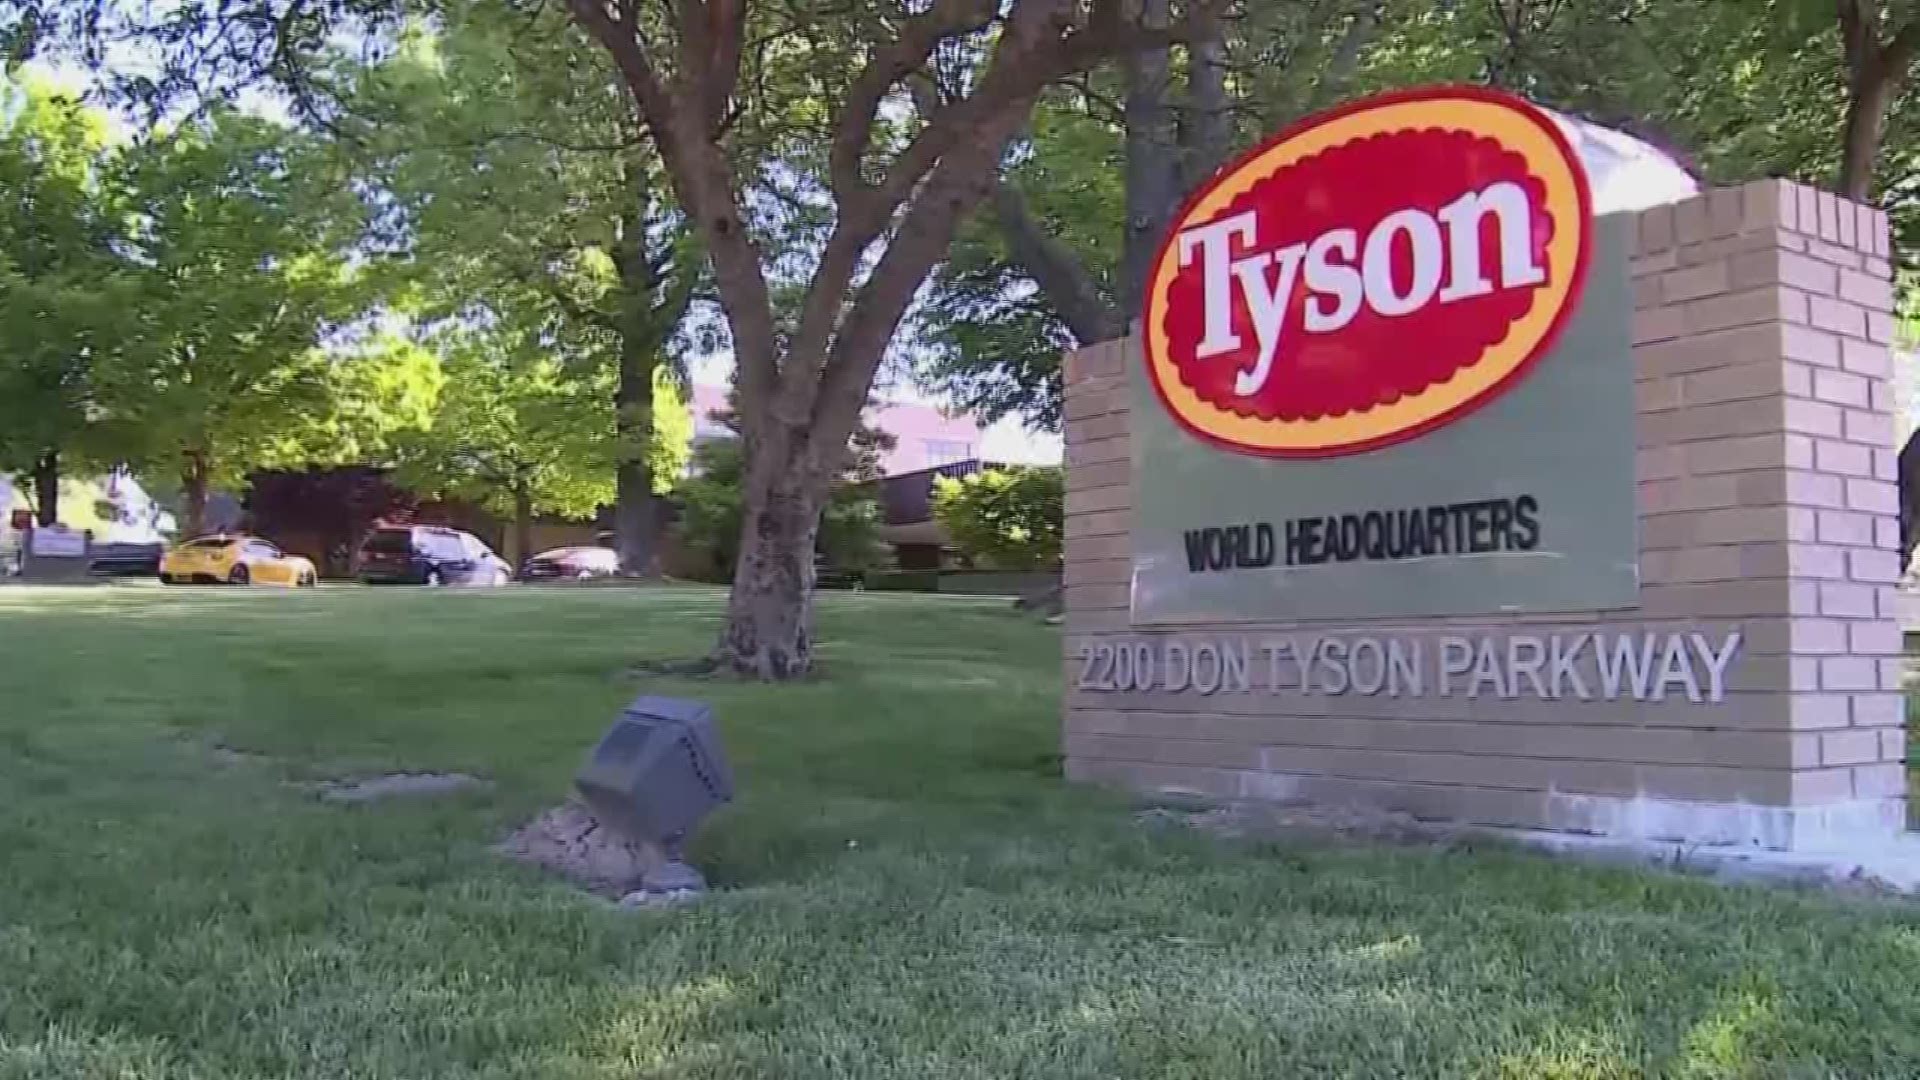 Tyson Foods says they're committing 13-million dollars to support critical needs in local communities.